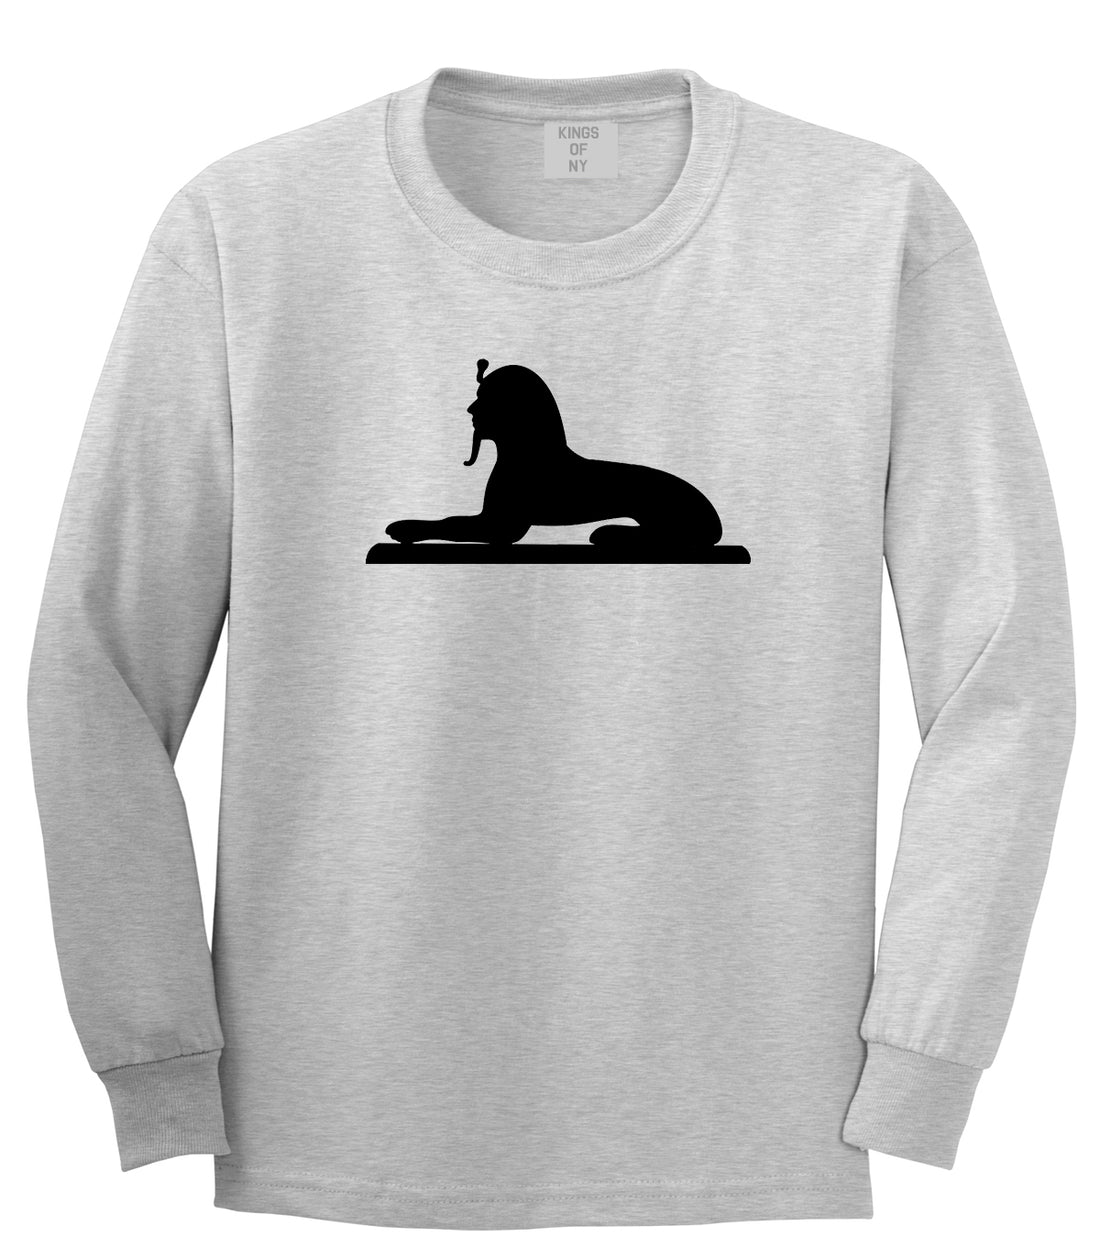 Egyptian Sphinx Mens Long Sleeve T-Shirt Grey by Kings Of NY